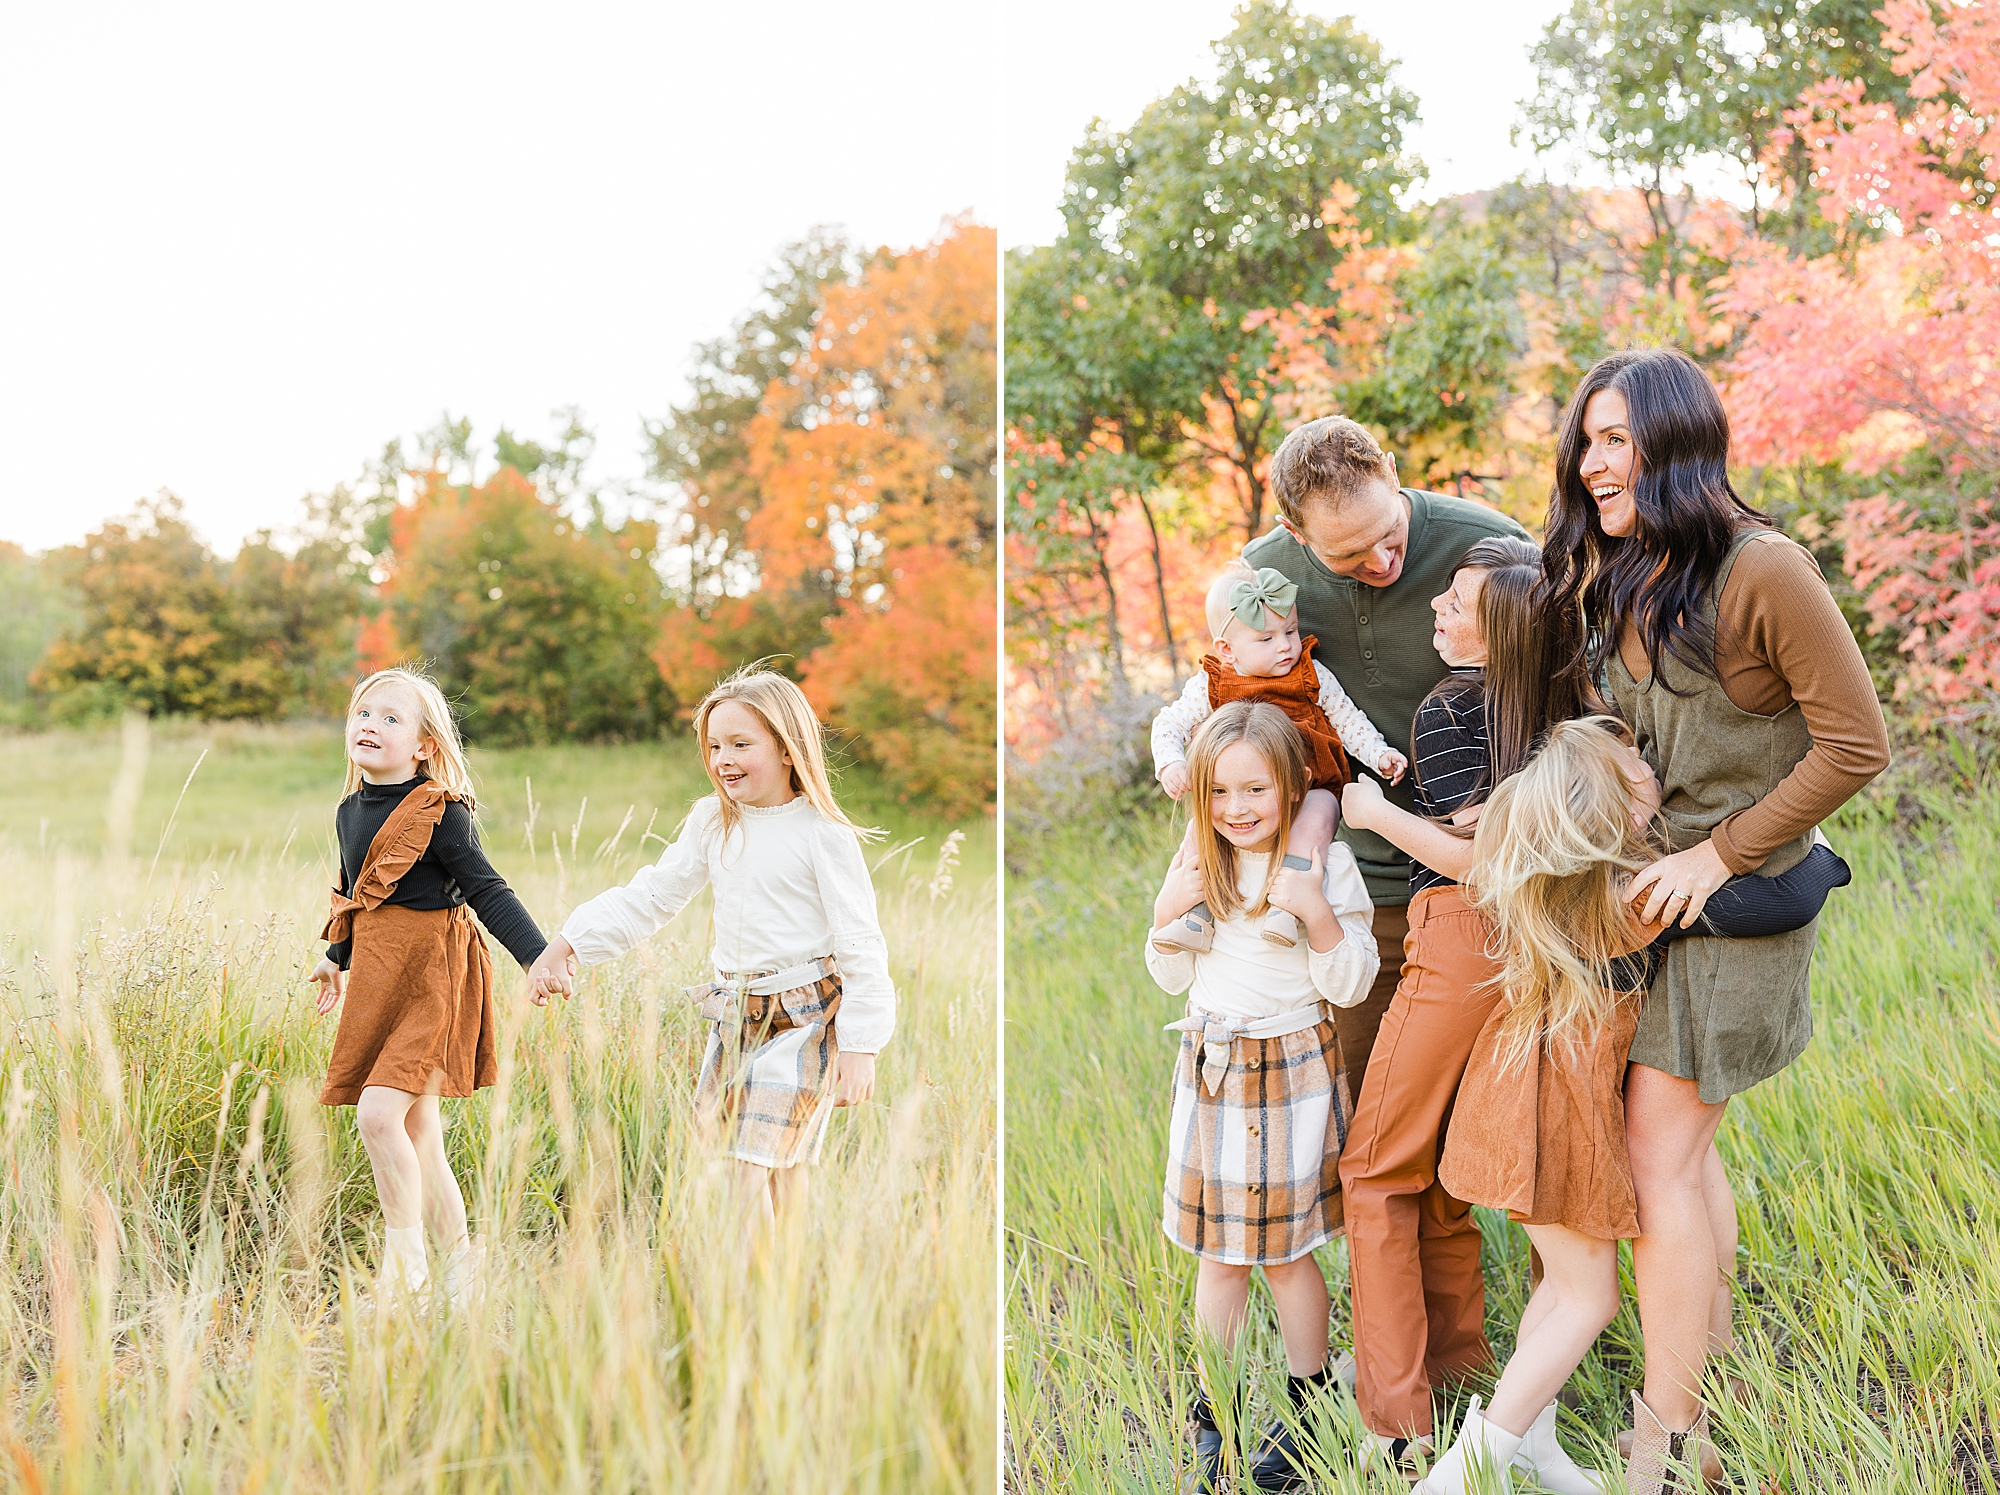 How to prepare your family for a fall photo session